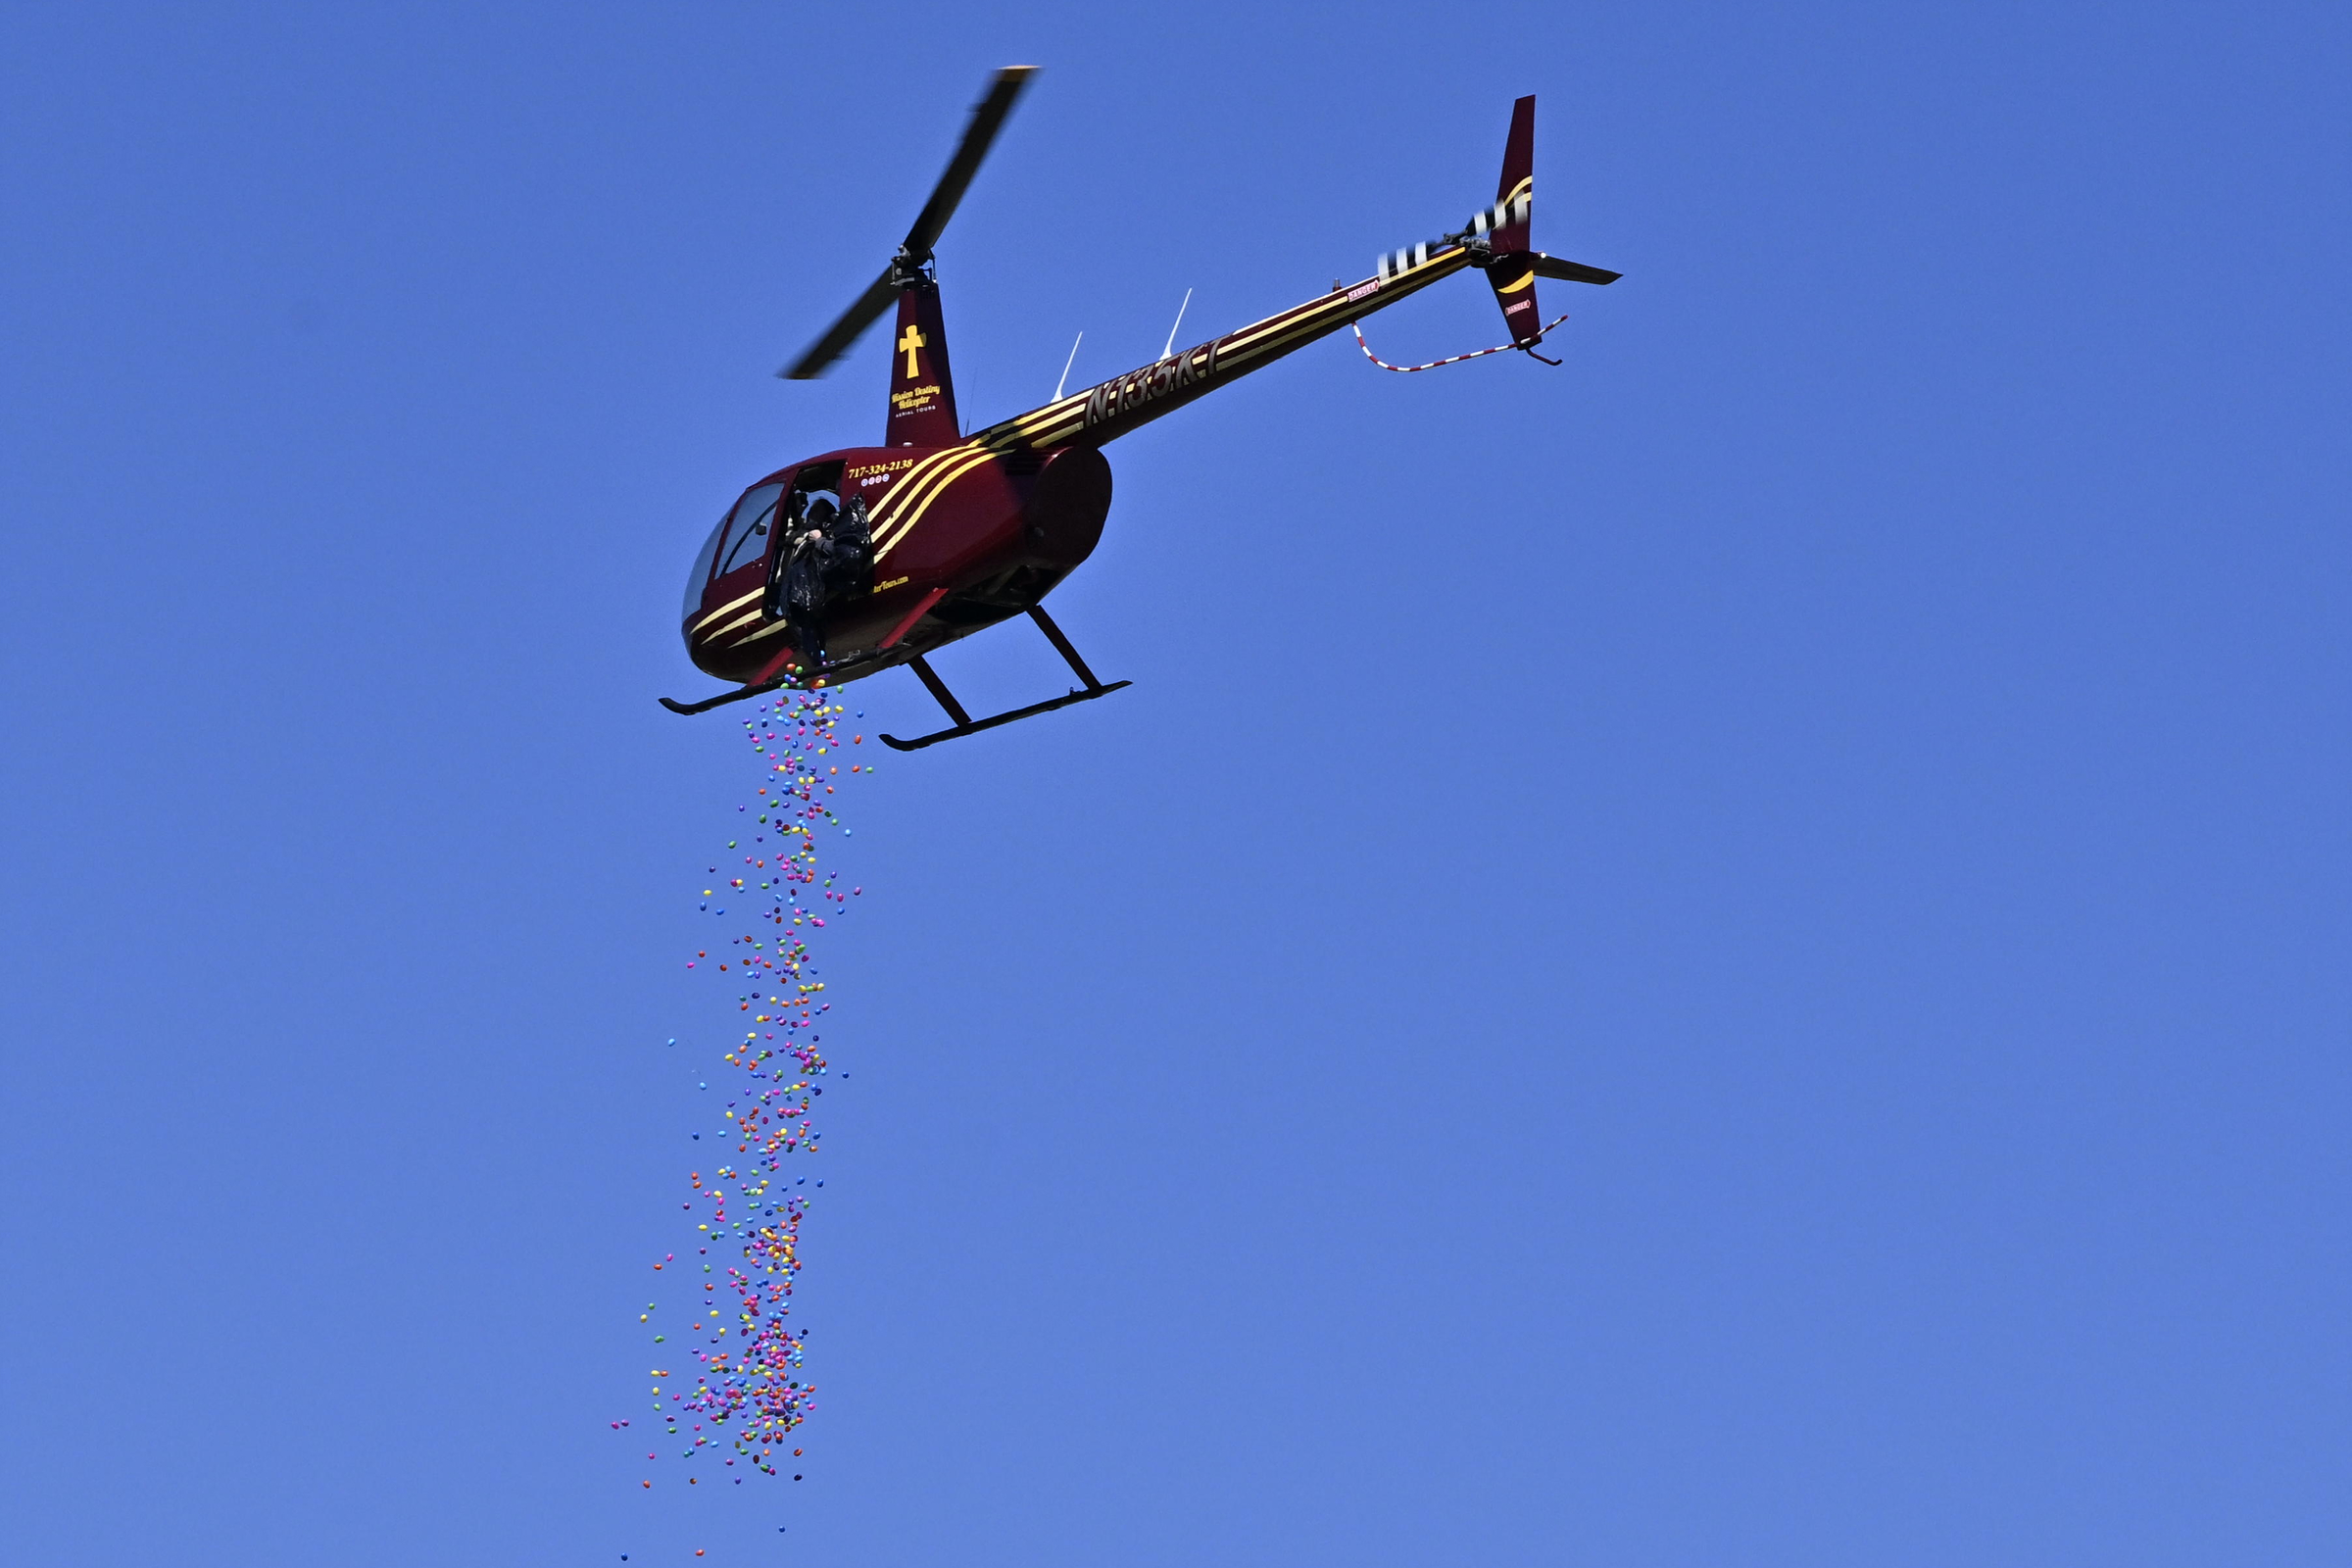 Plastic eggs pour from a helicopter during the Coppermine Eggstravaganza at Cascade Park in Hampstead. (Thomas Walker/Freelance)